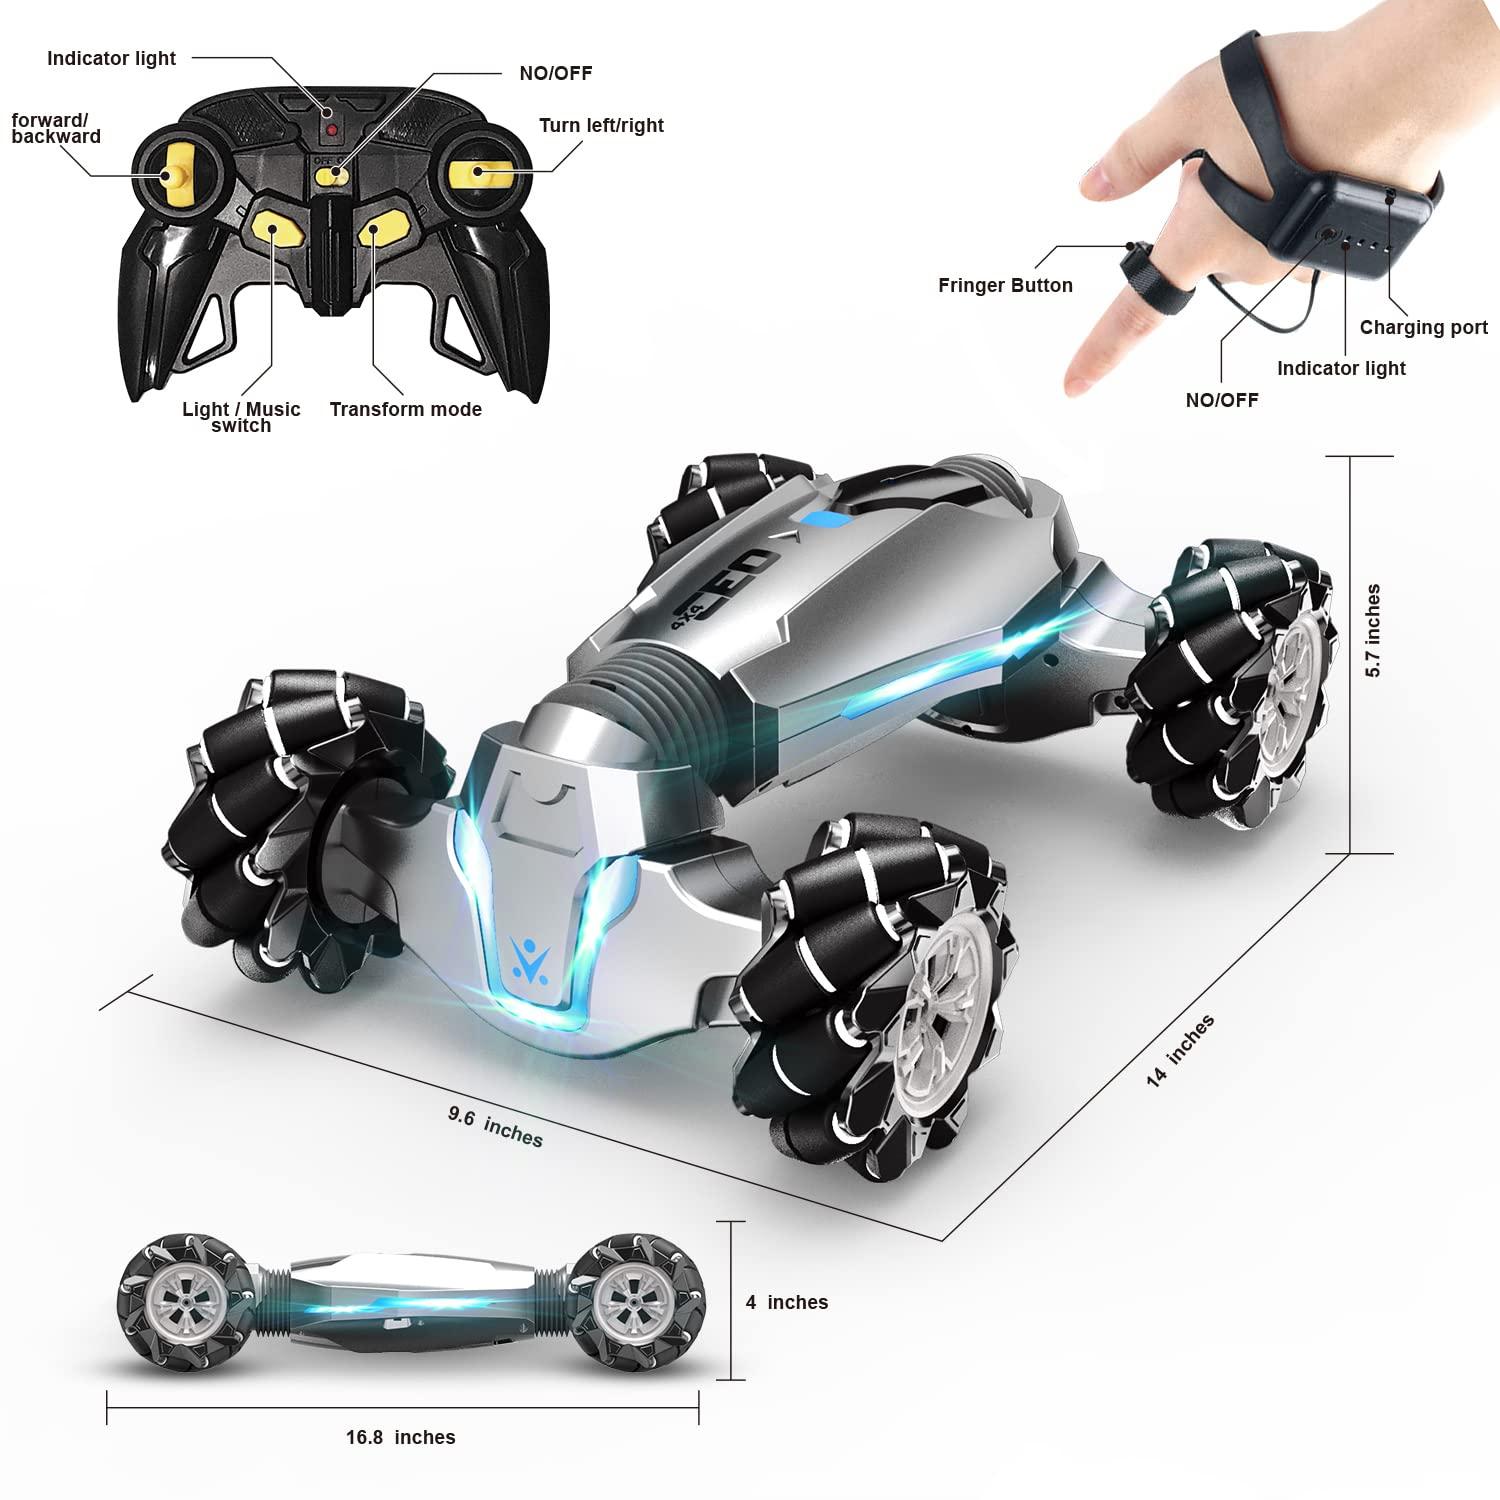 Rc Car Hand Control: Intuitive Control with Hand Gestures